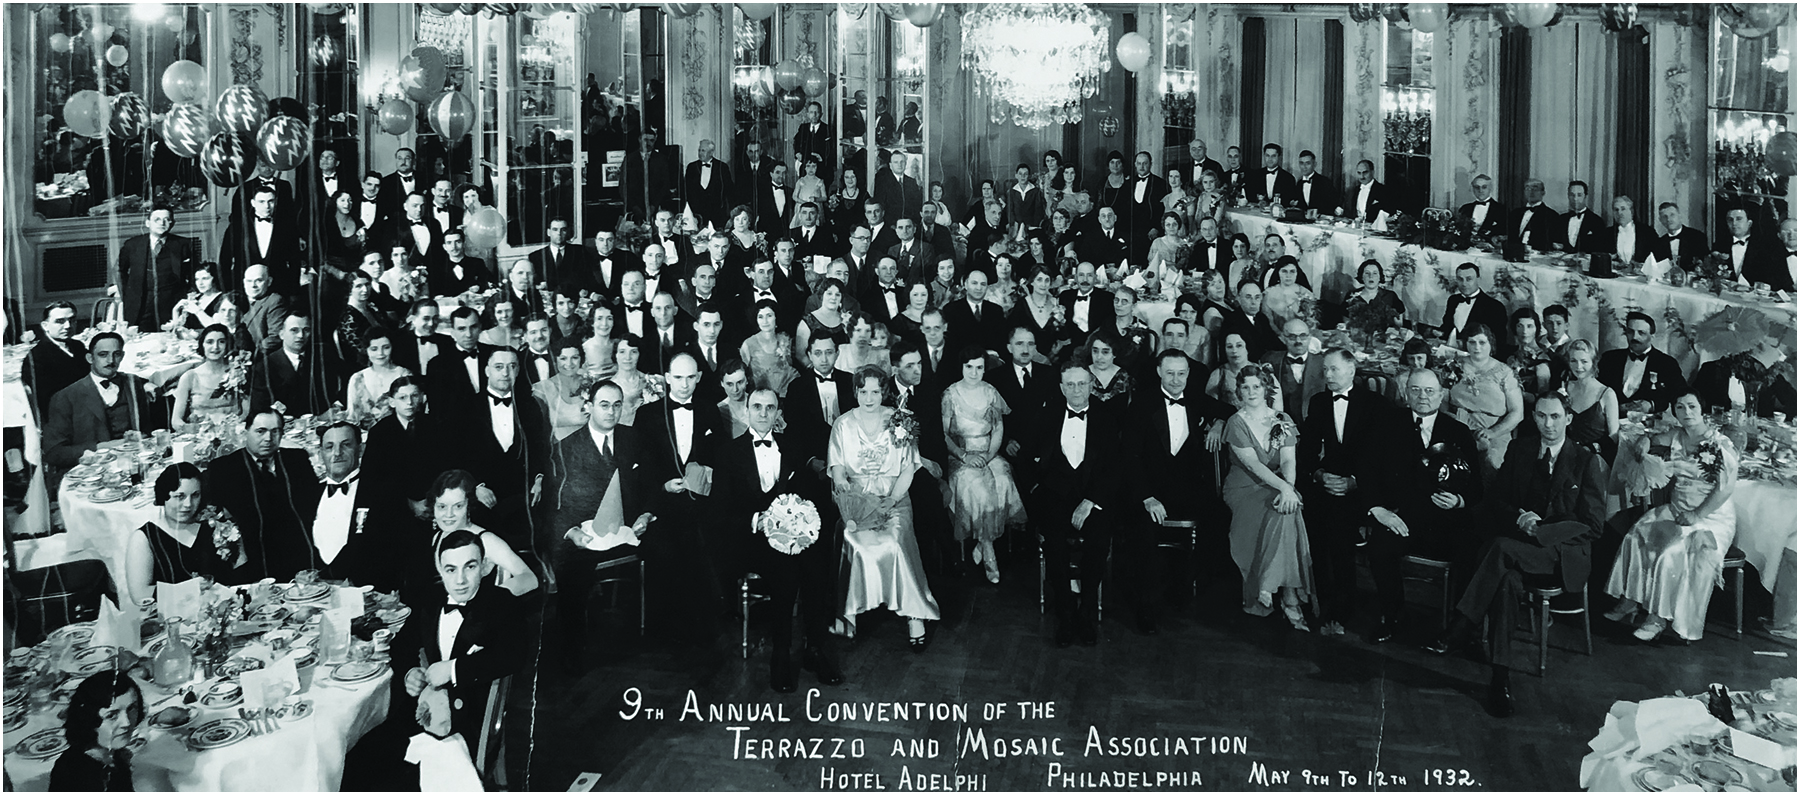 1932 9th Convention